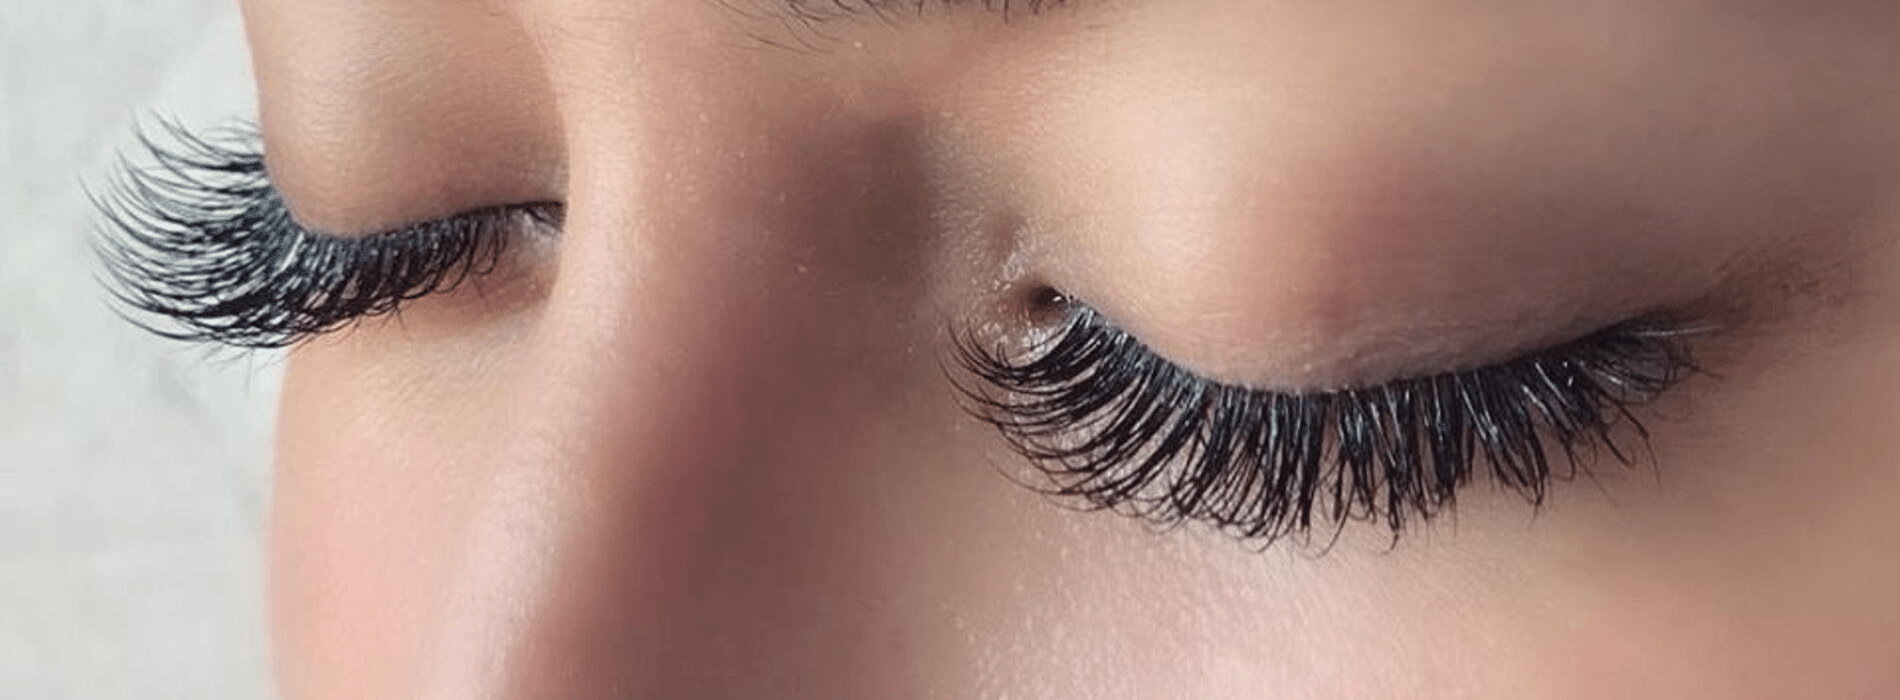 So you're thinking about getting eyelash extensions